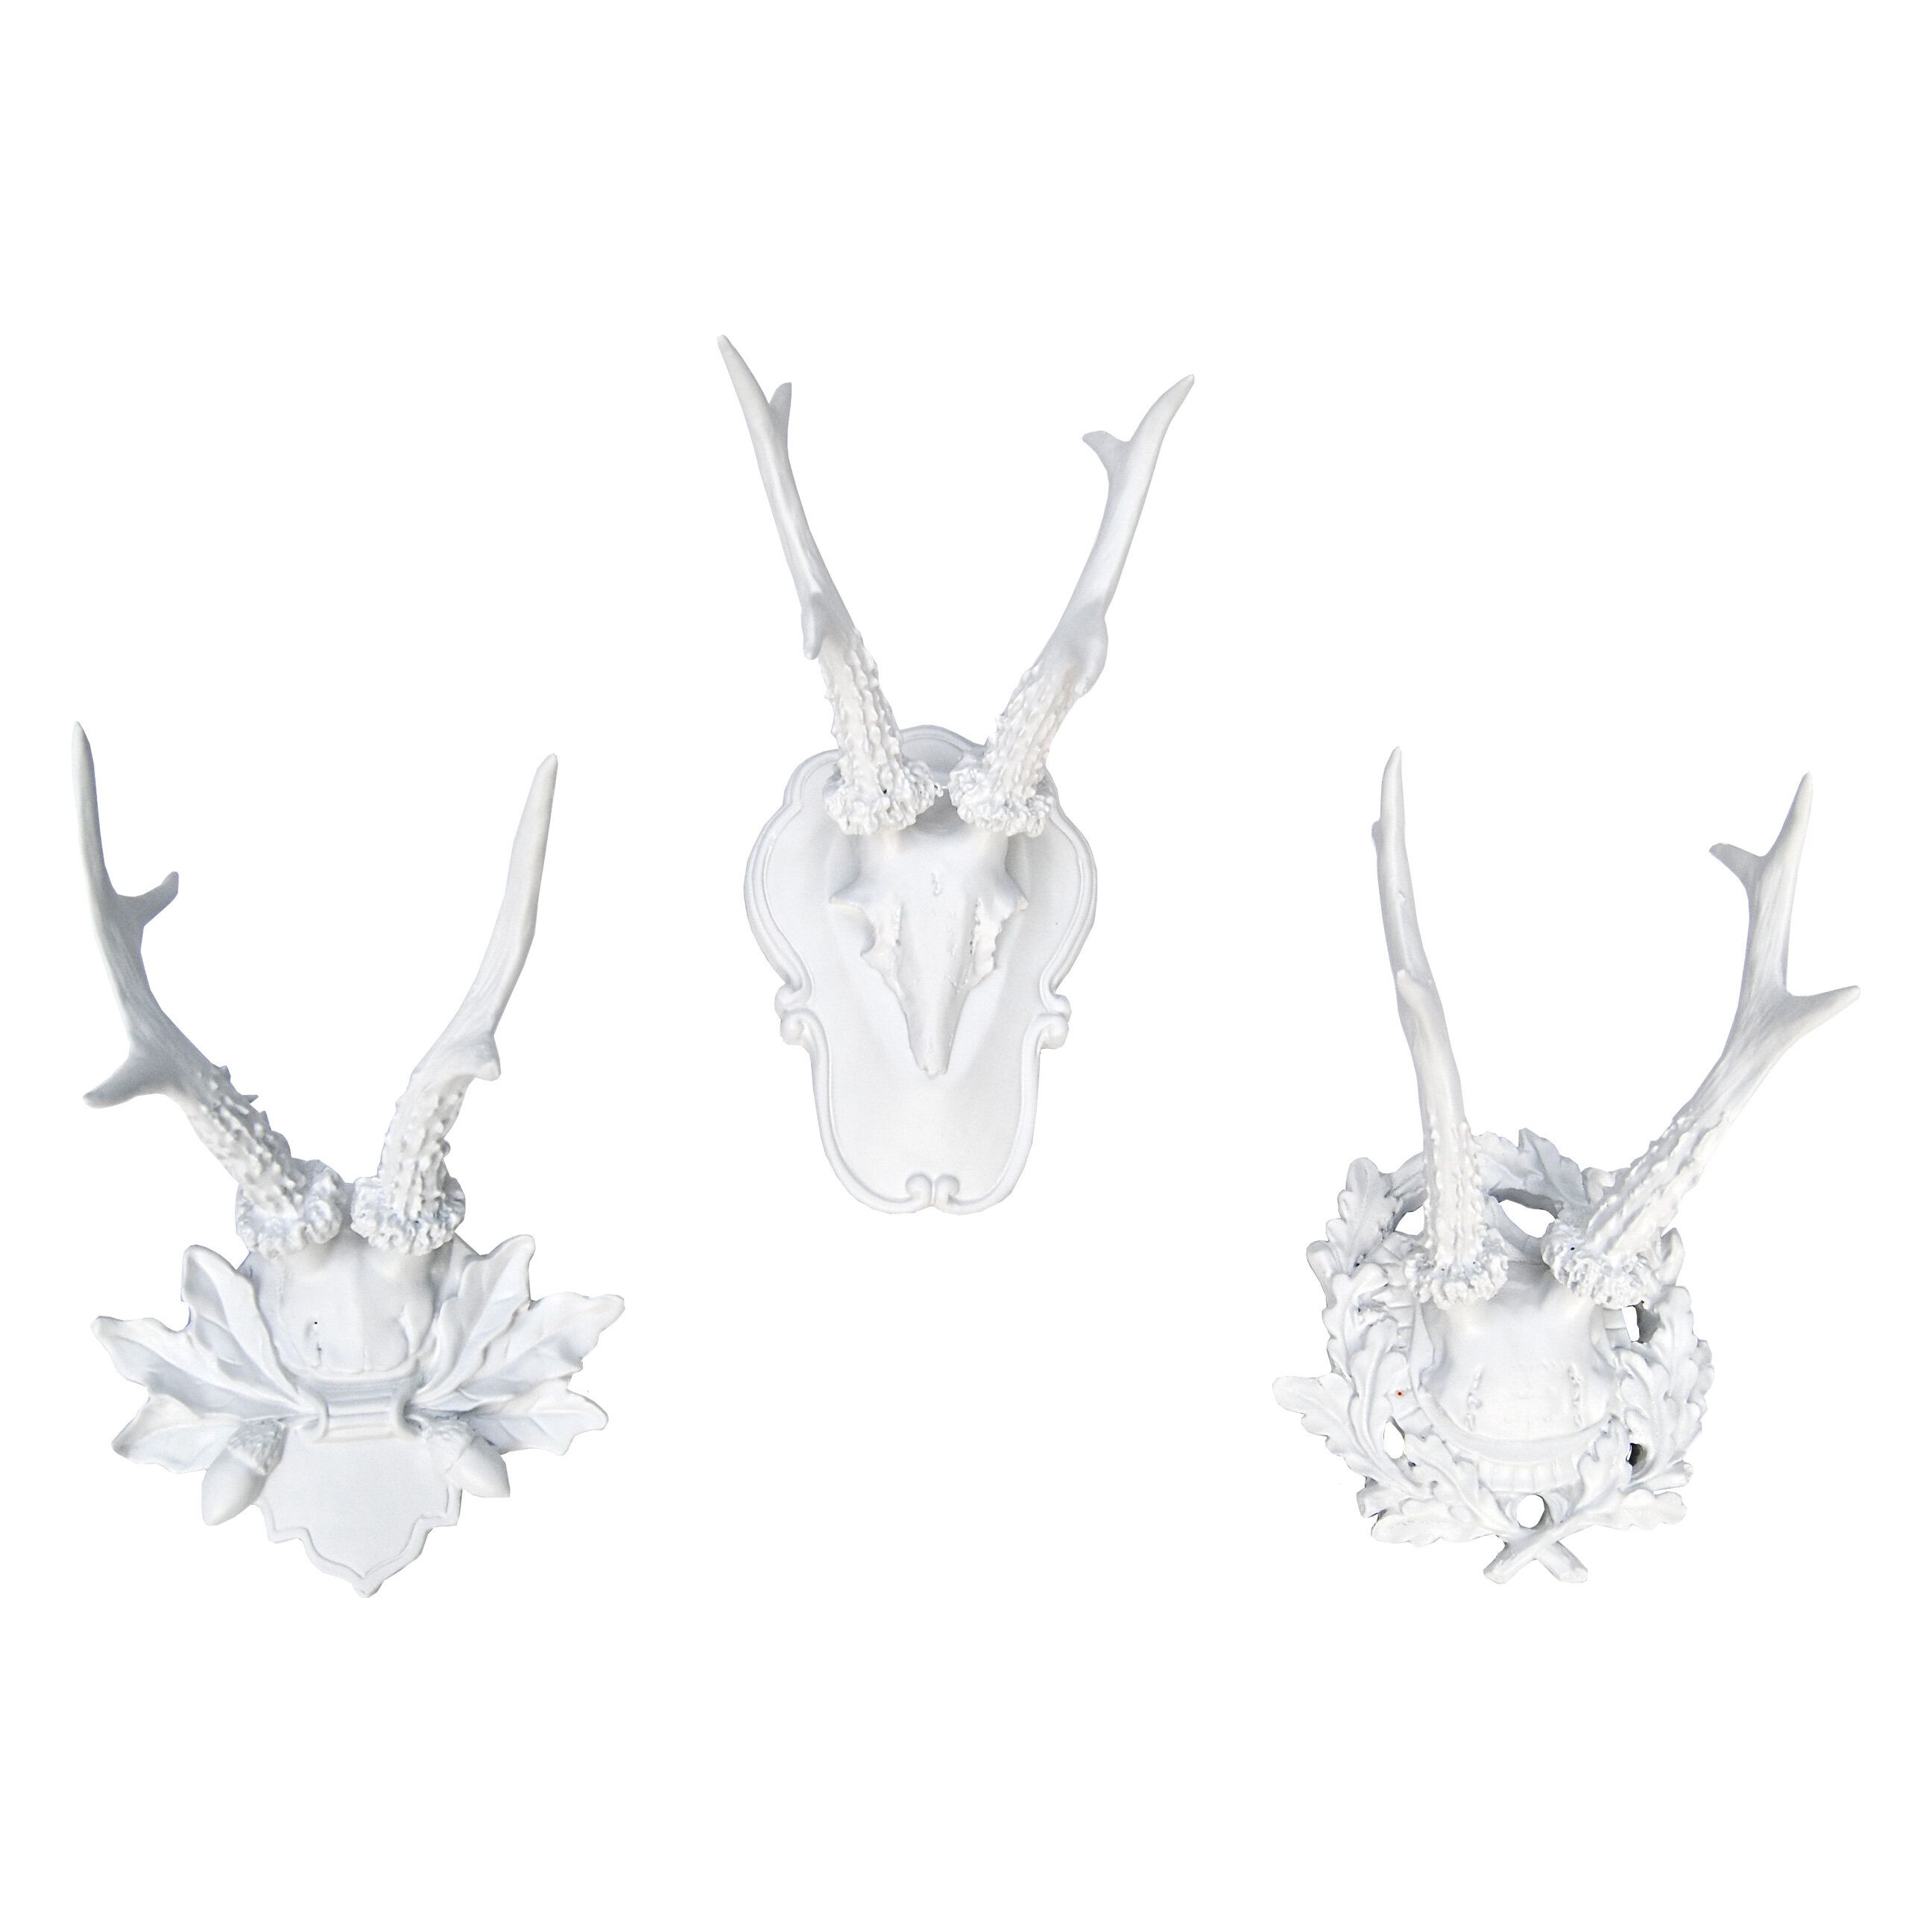 Faux Taxidermy Fancy Roe Deer Antler Wall Décor Set With Highlands Ranch The Templeton Wall Decor (View 15 of 30)